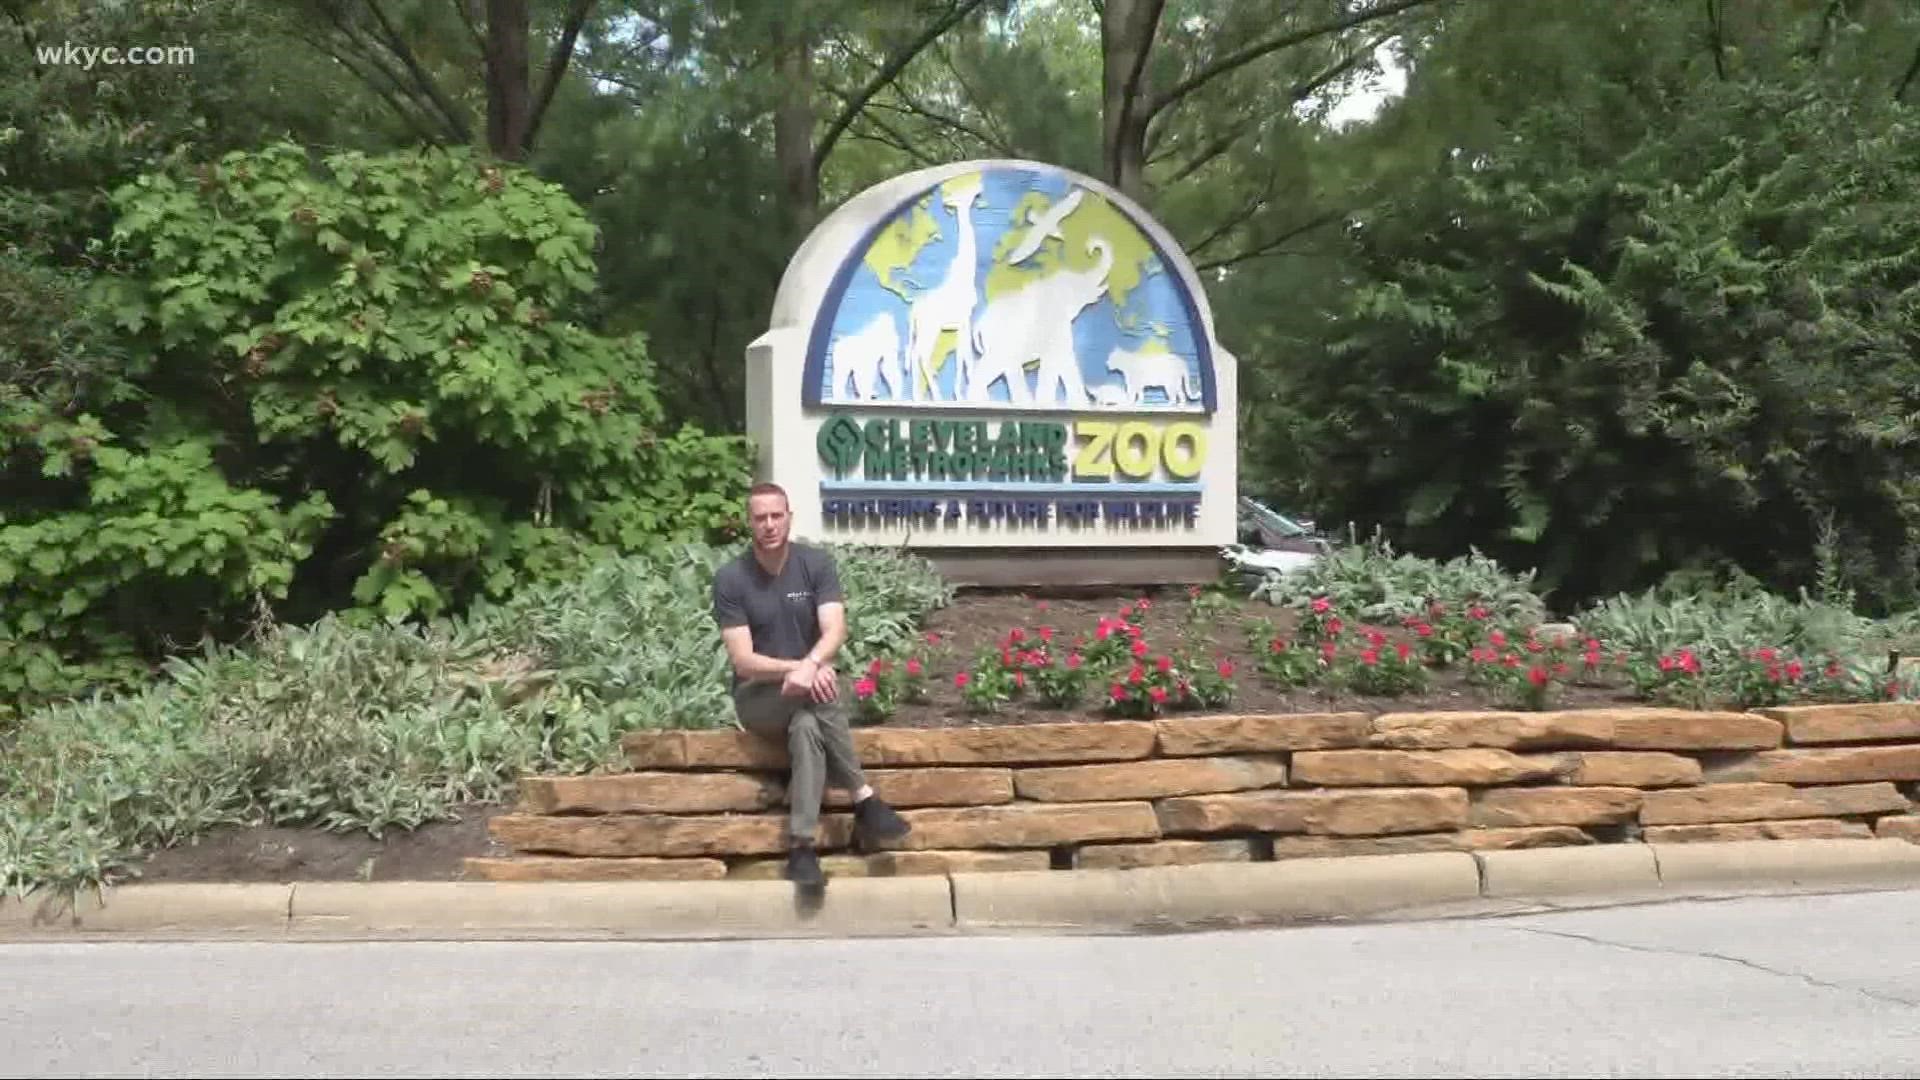 The Cleveland Metroparks zoo sees over a million visitors in a typical year. Mike Polk Jr. has some facts about the place